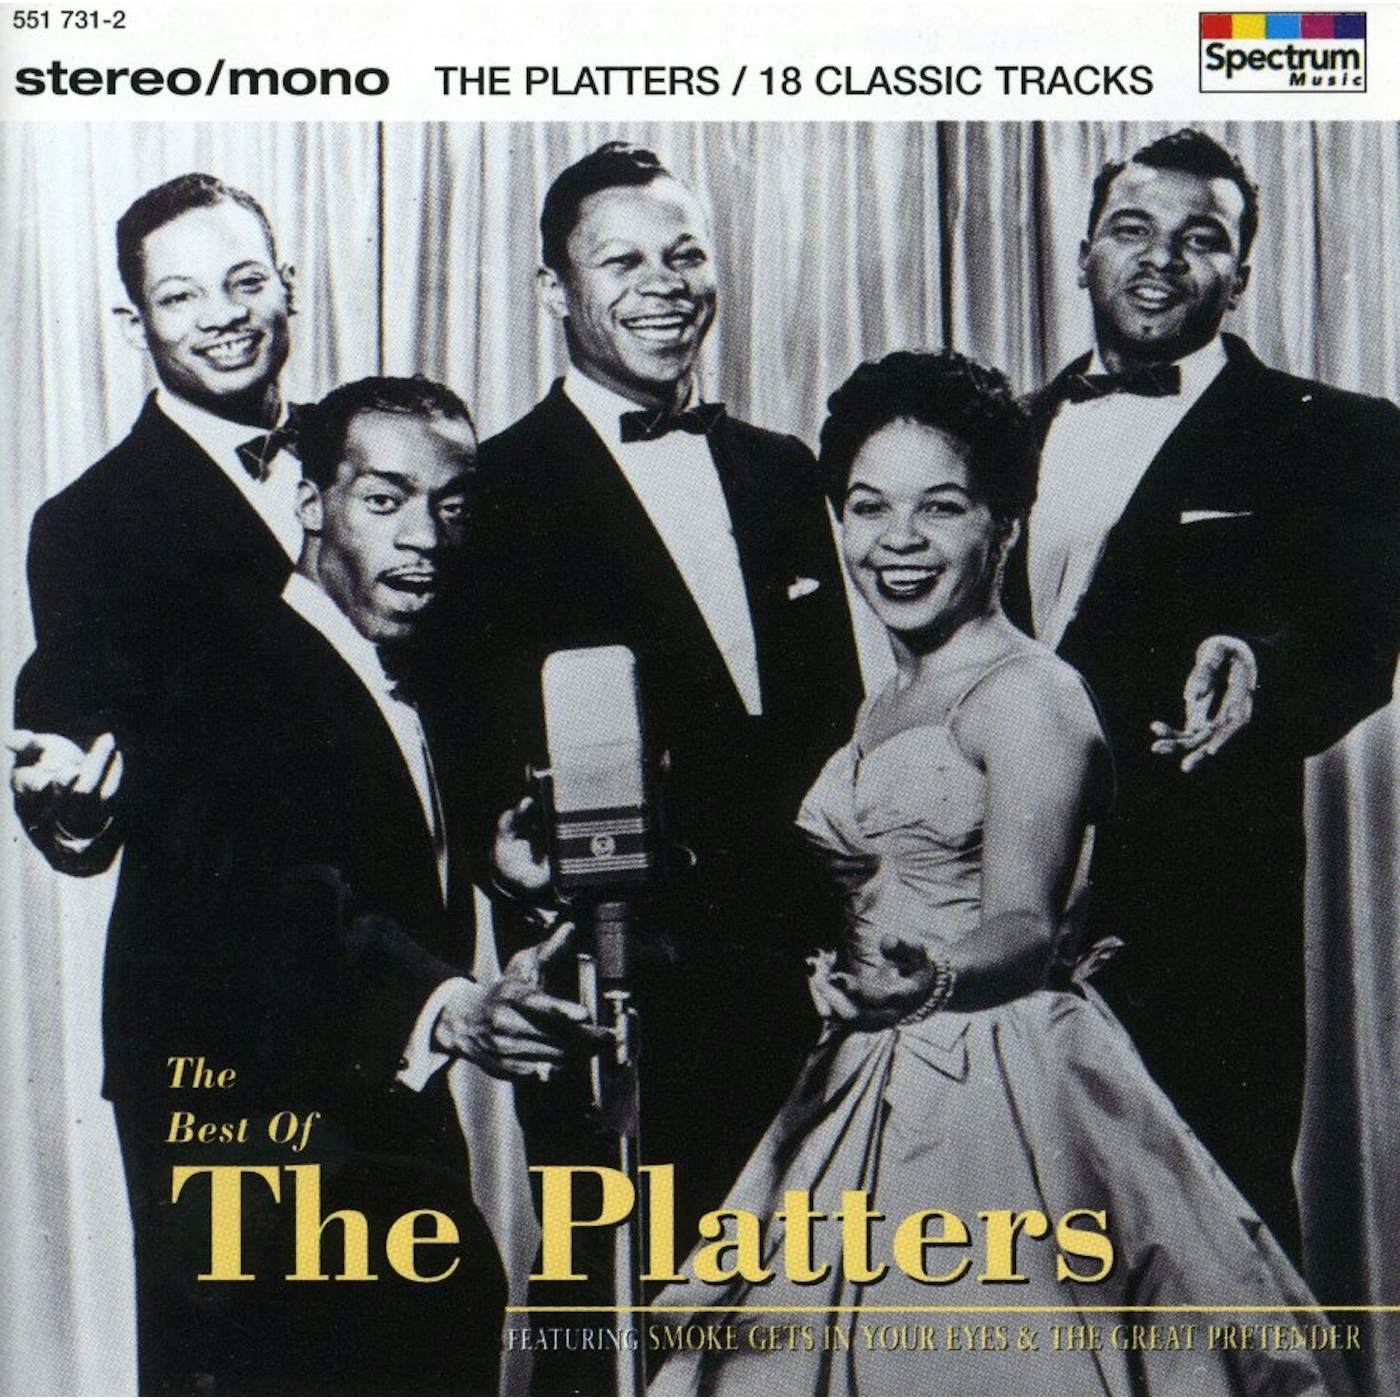 The Platters BEST OF CD